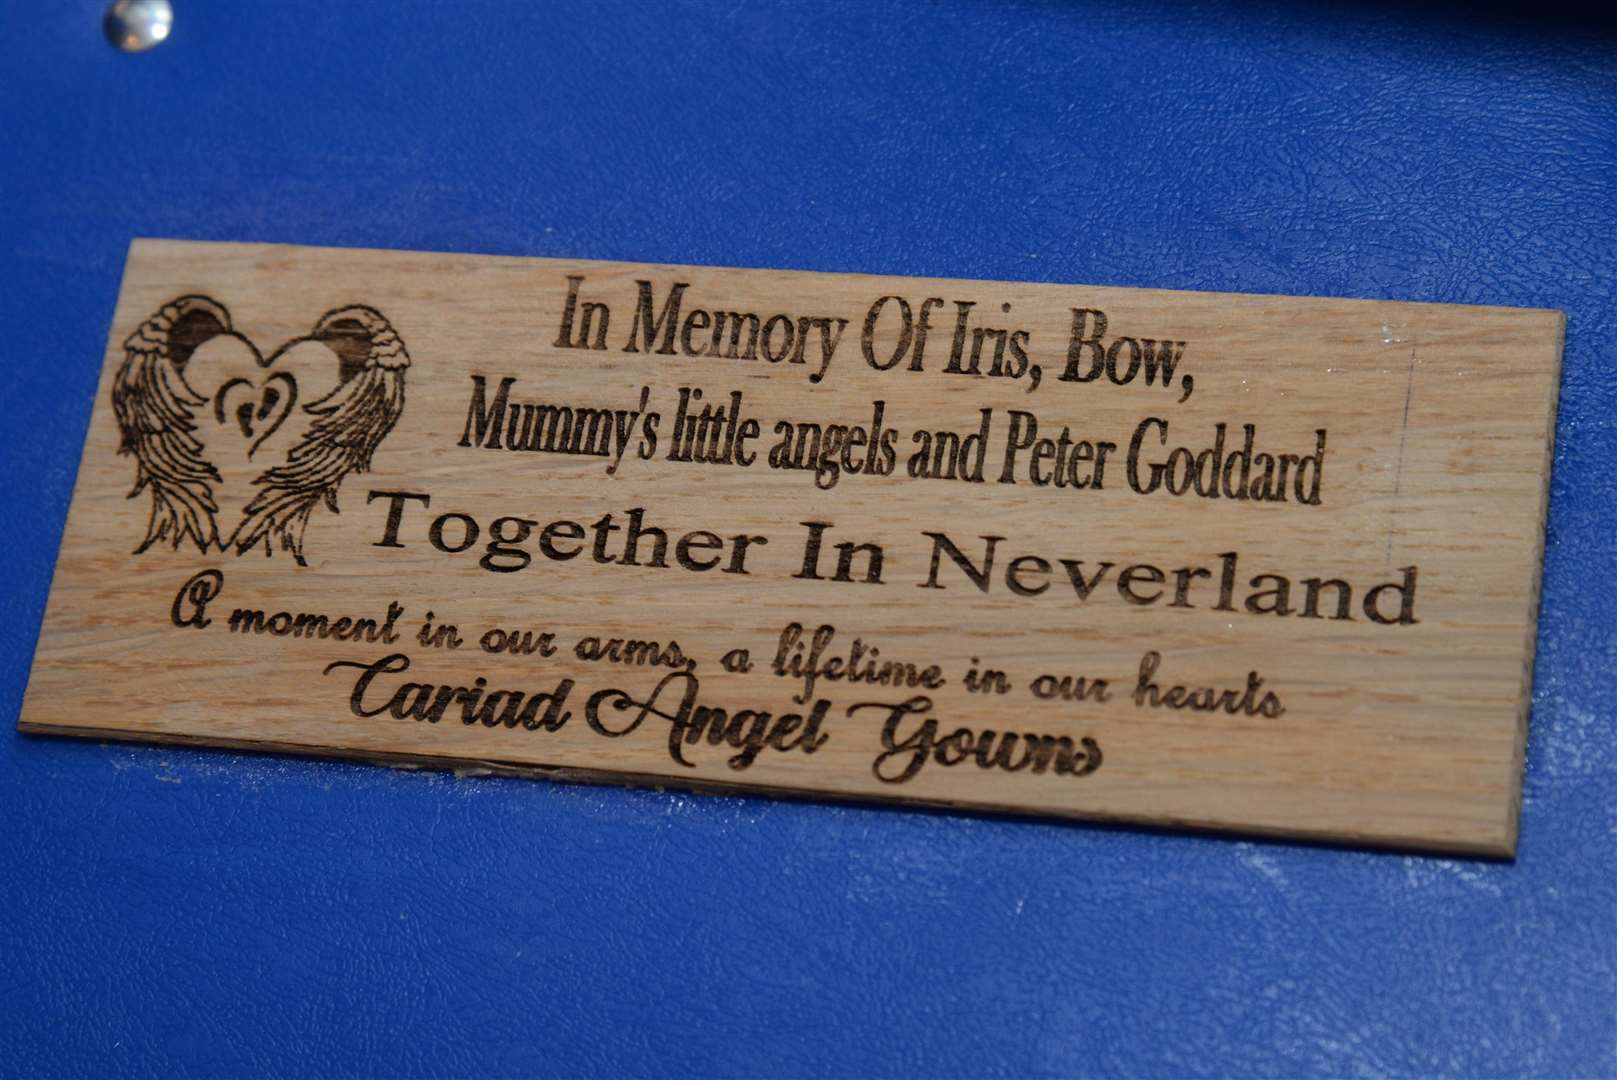 The plaque attached to the cuddle cot